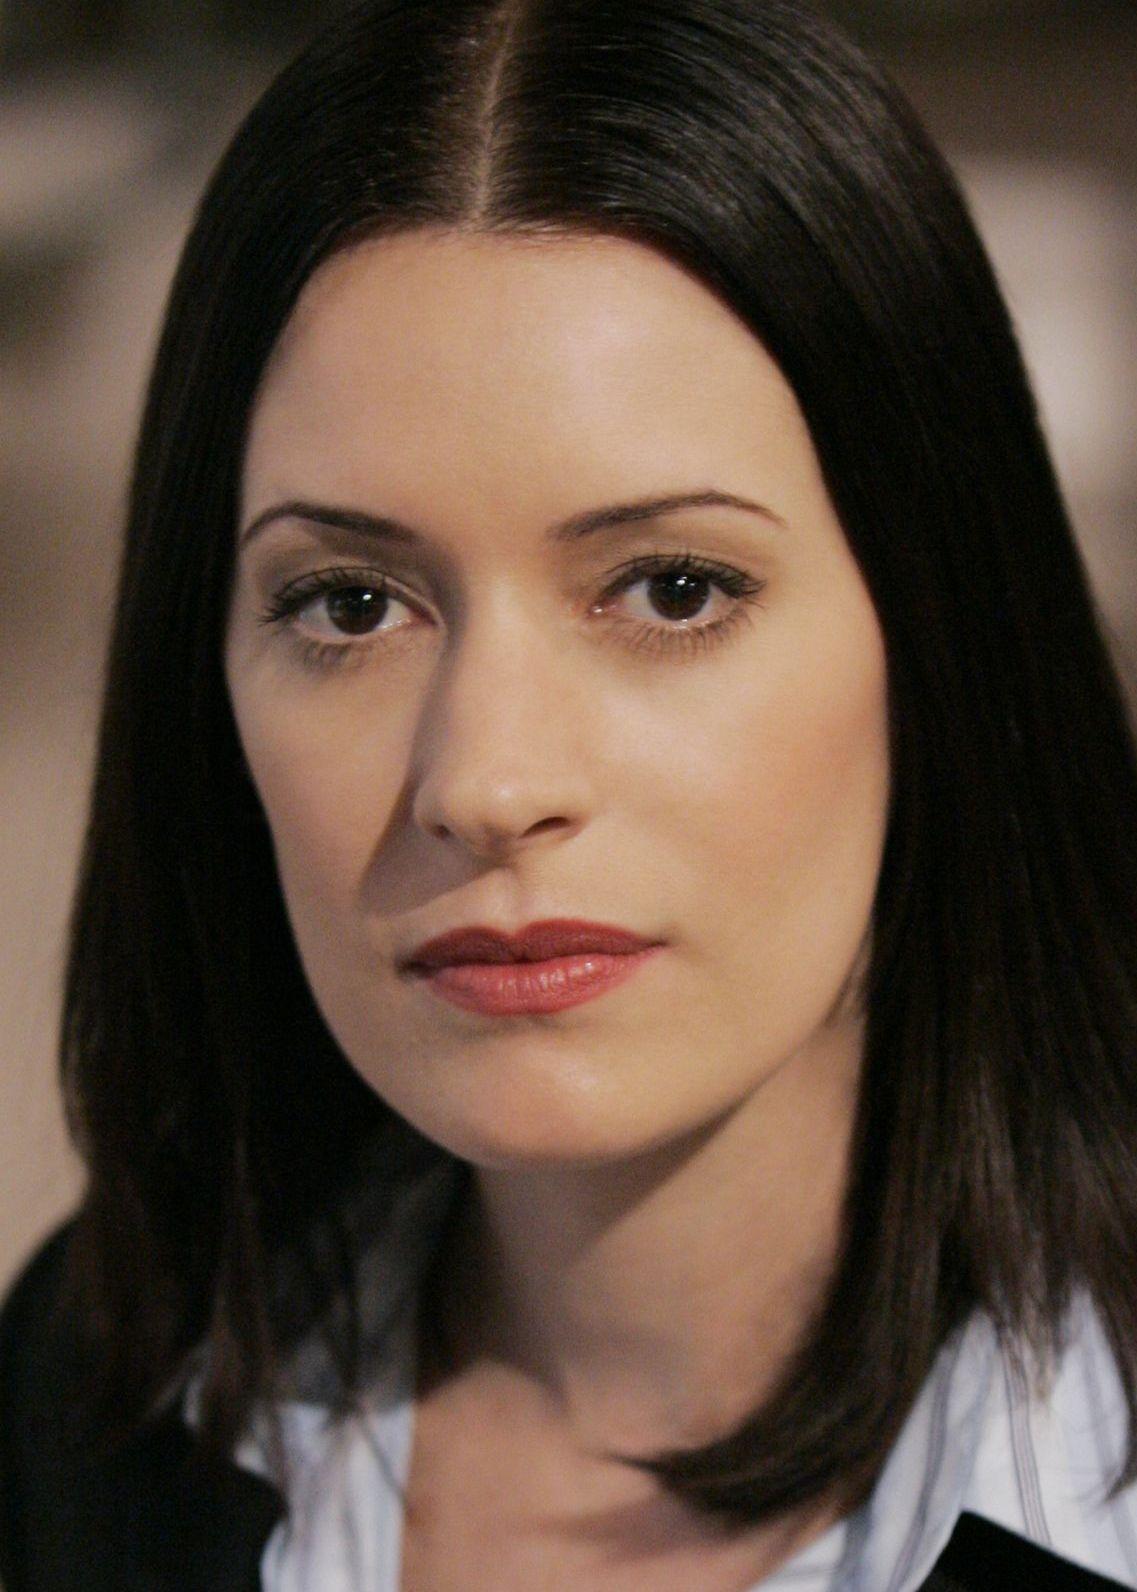 70+ Hot Pictures Of Paget Brewster From Criminal Minds Will Brighten Up Your Day 277